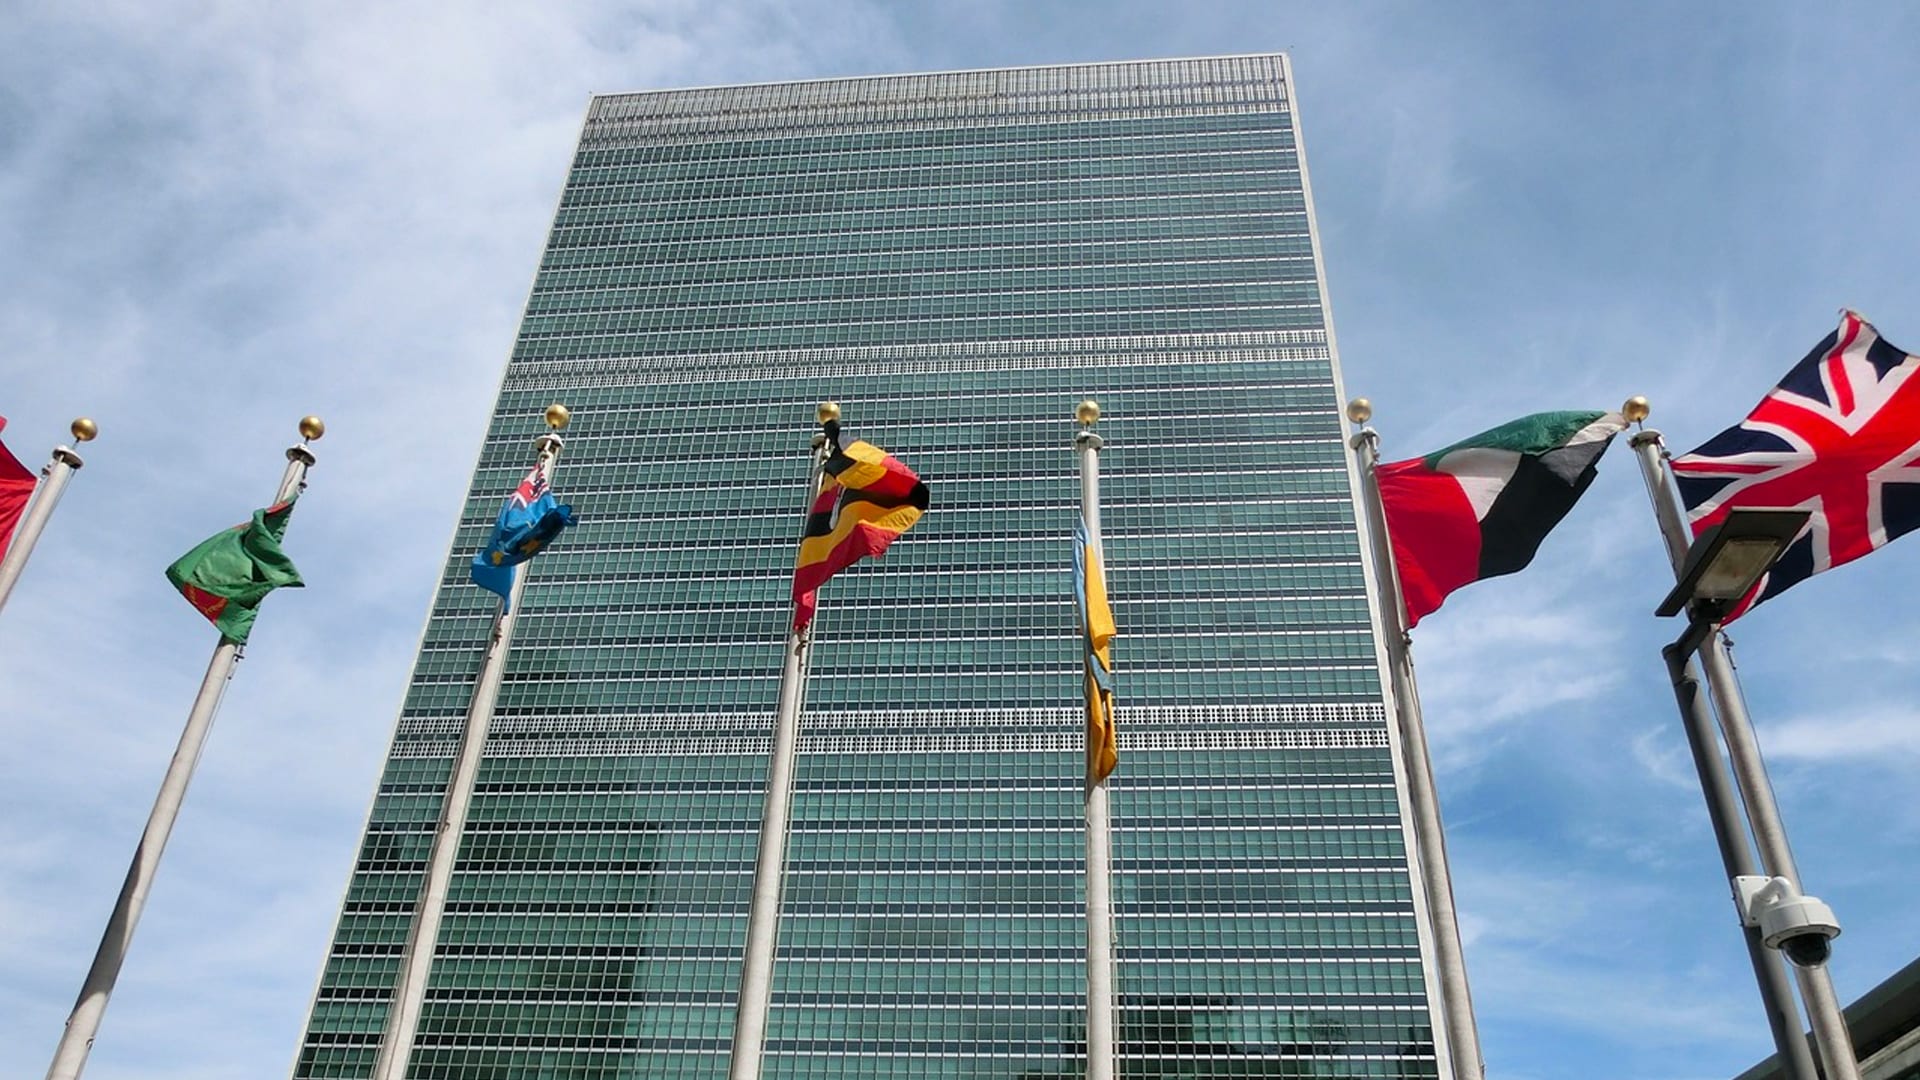 Listen or Lead? UNGA and Climate Week Offer a Moment to Assess a Company’s Purpose